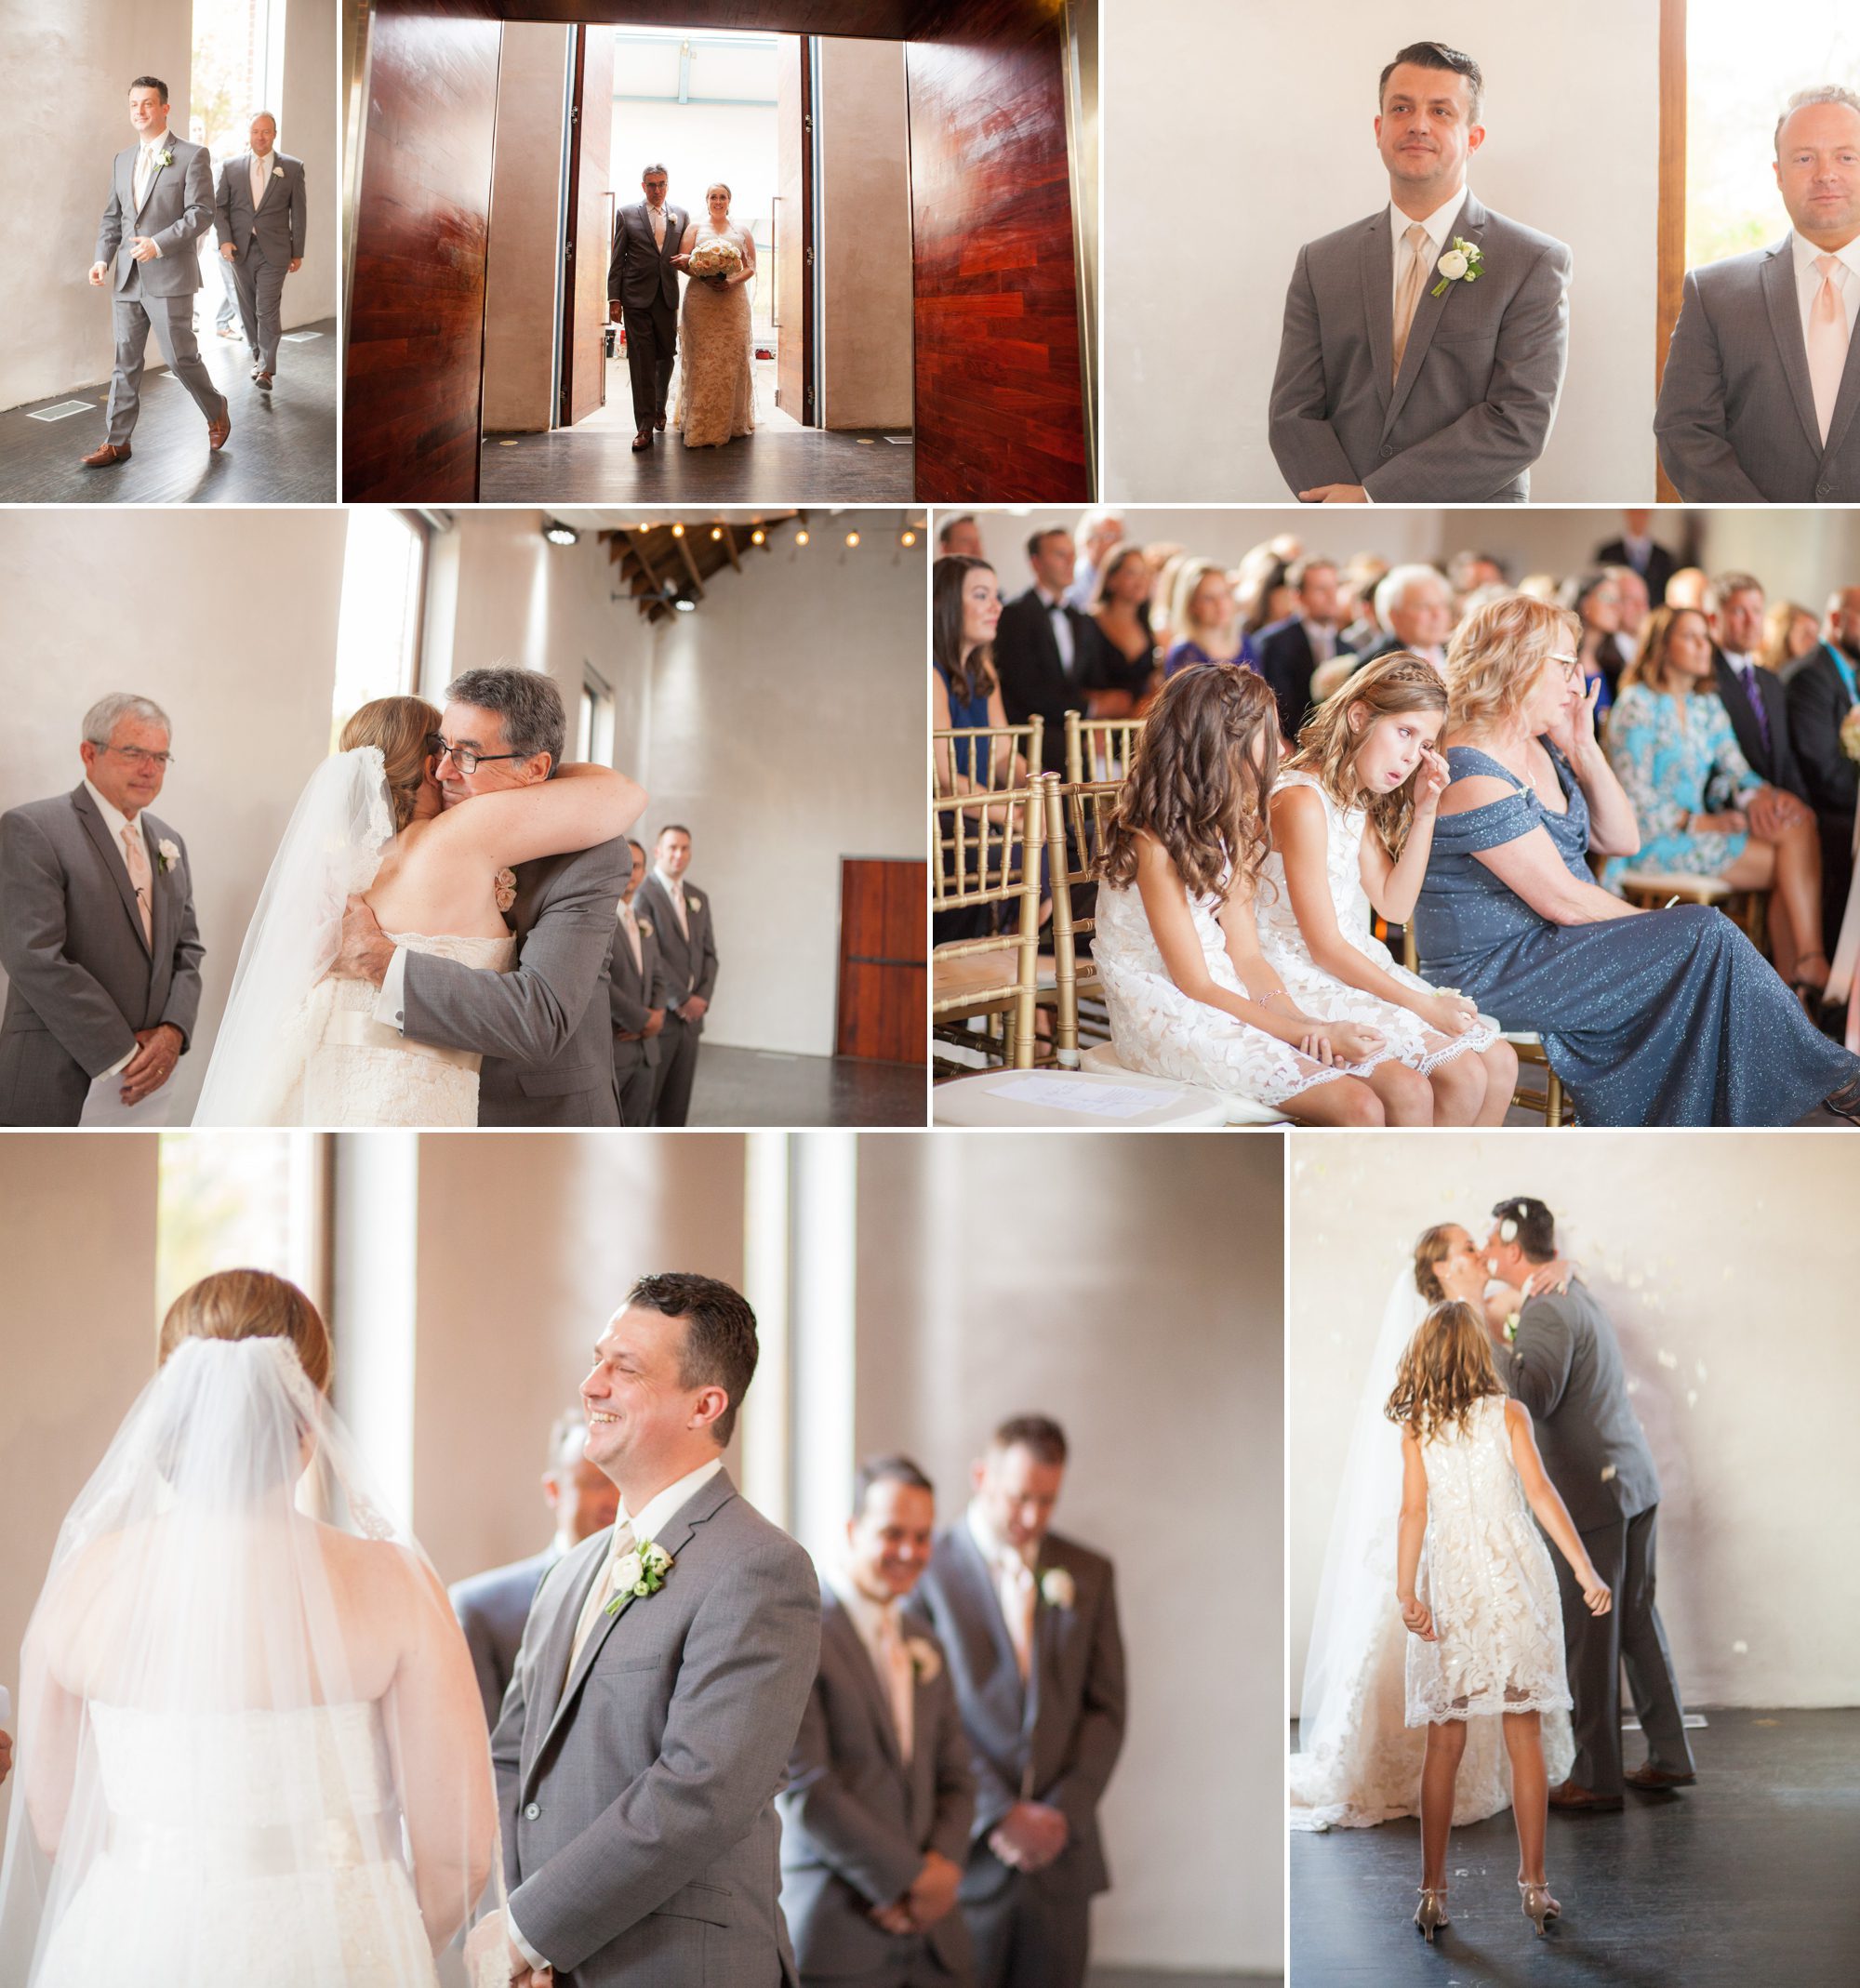 Photos from modern ceremony wedding venue at Ruby, Nashville TN. Wedding photography by Krista Lee, Krista Lee Photography Franklin TN